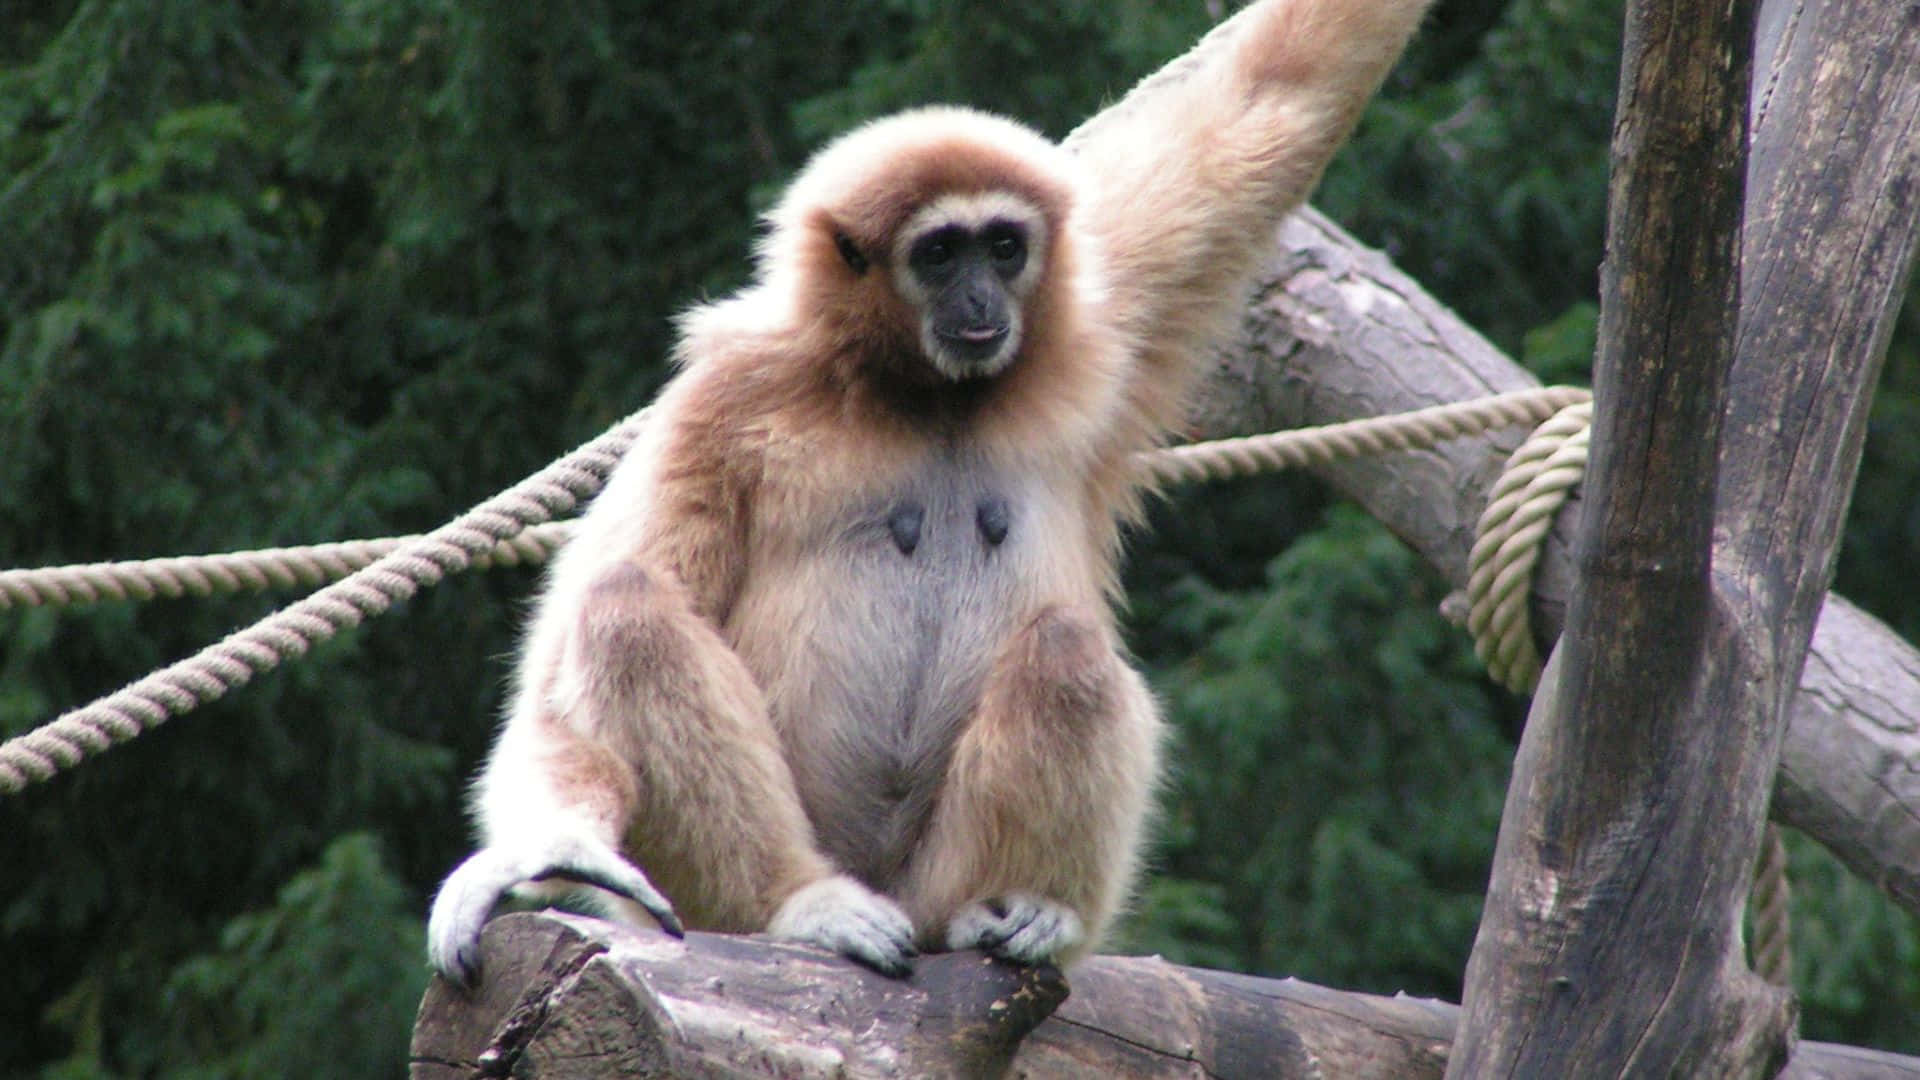 A 1080p Gibbon Resides in Its Natural Habitat